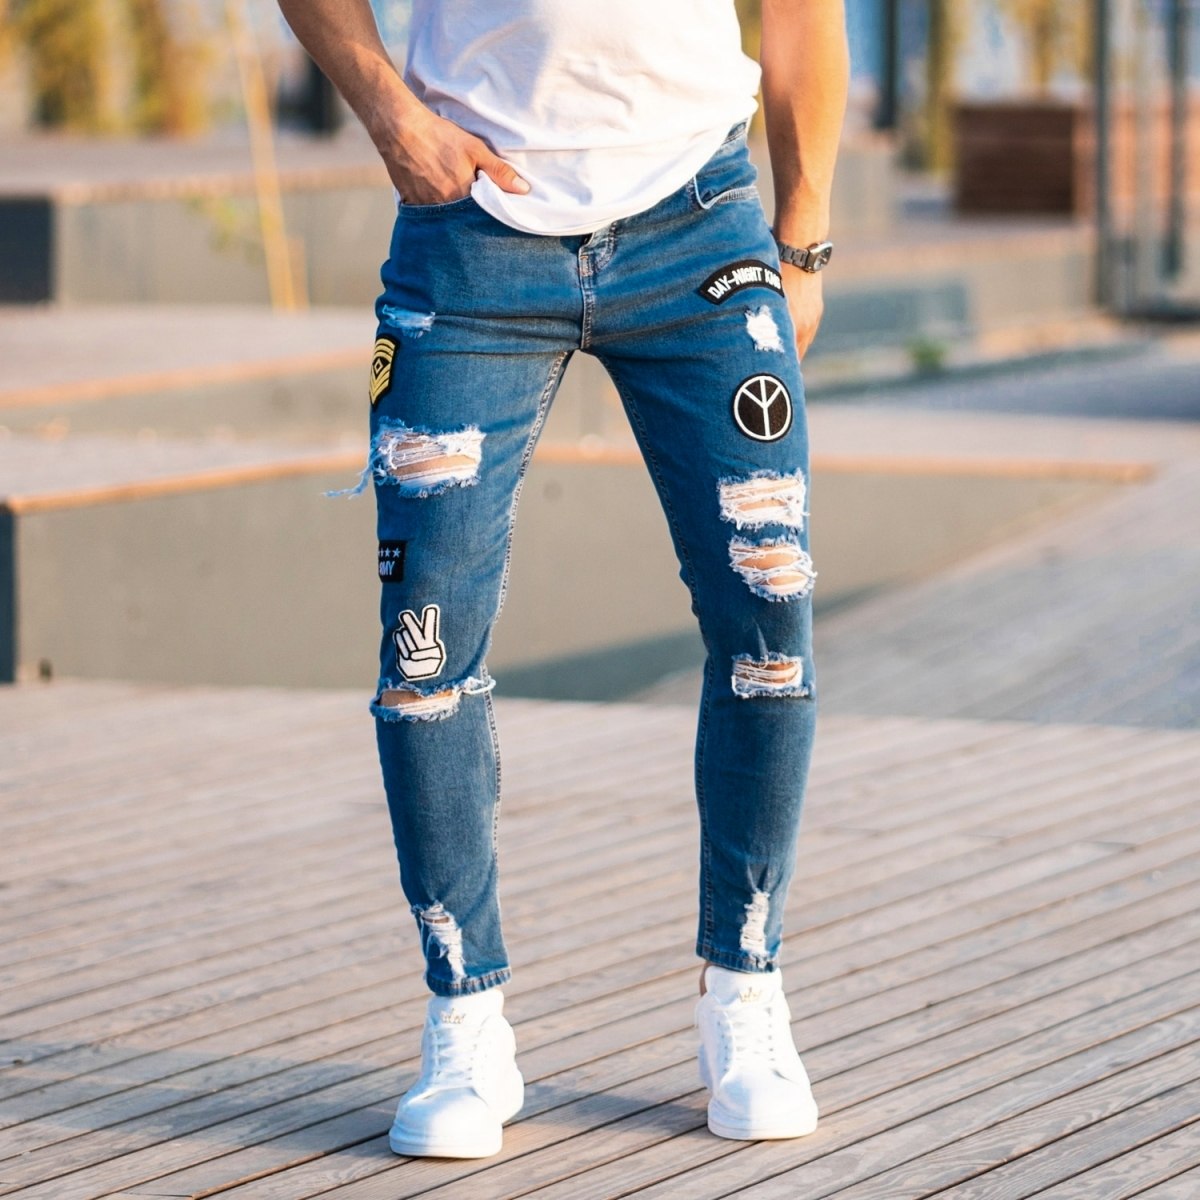 Men's Patchworked Jeans In Blue - 1